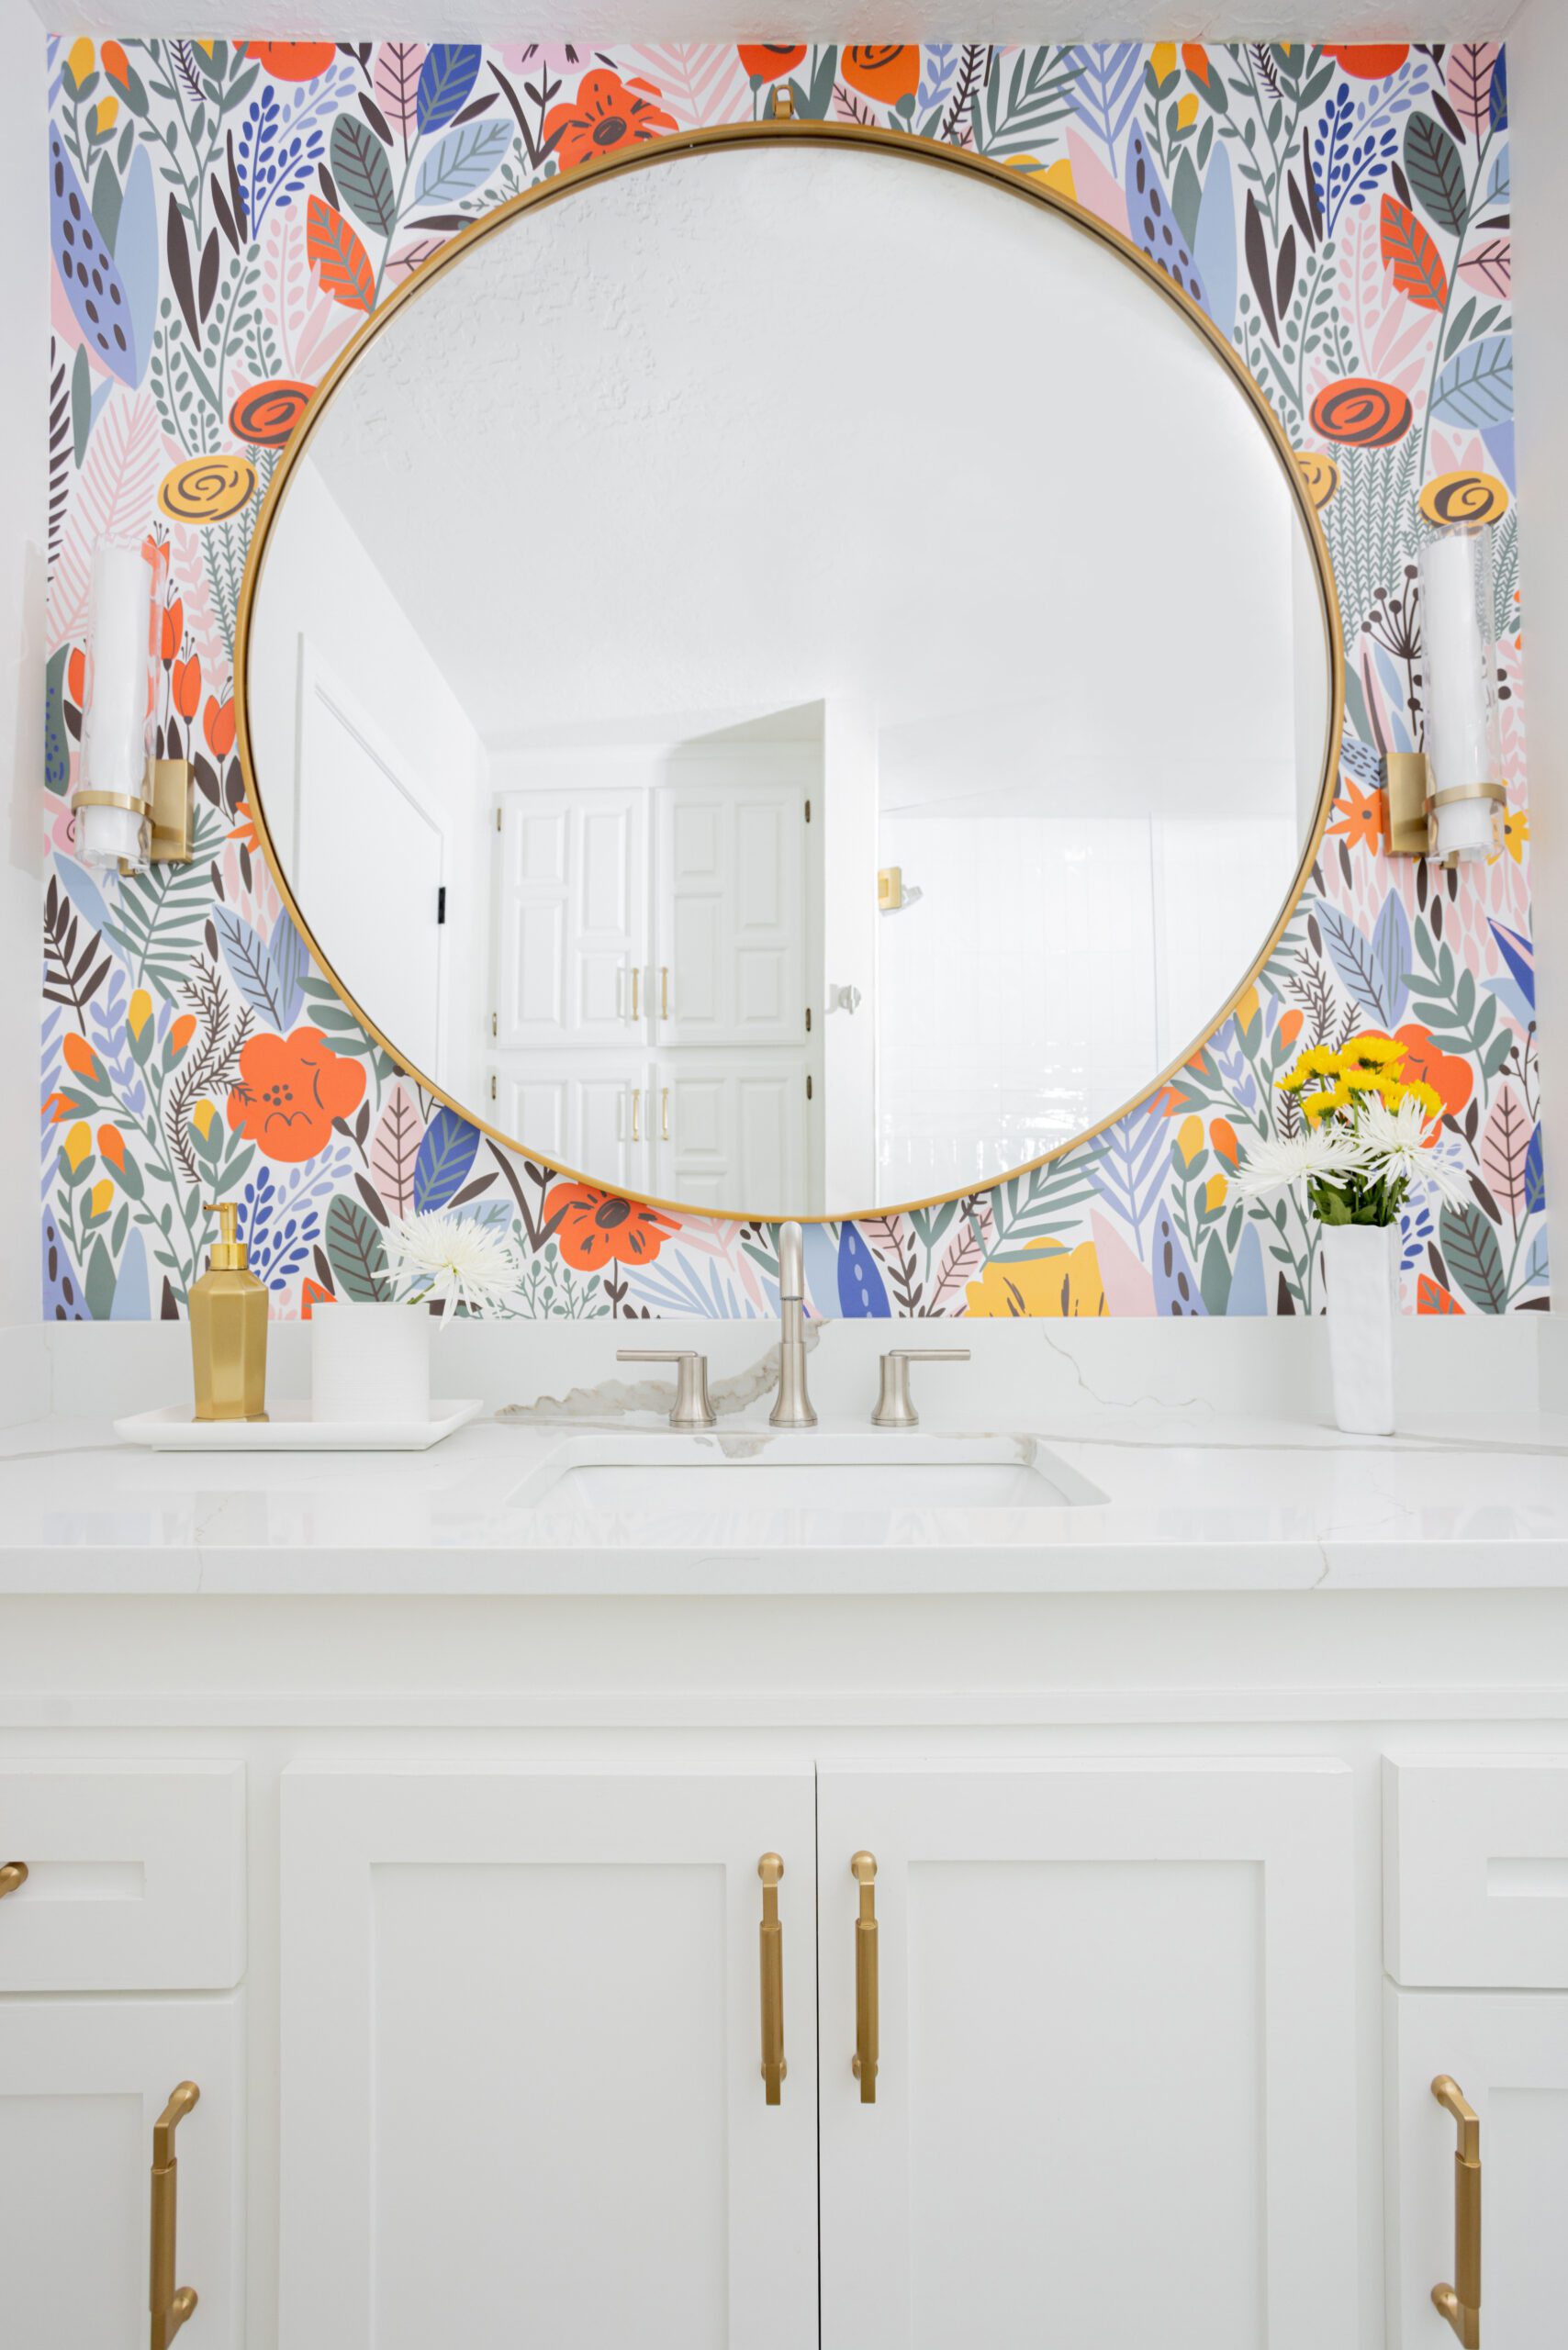 Bright, floral wallpaper in bathroom with white cabinets and gold accents. Design by Kirkendall Design Tulsa OK